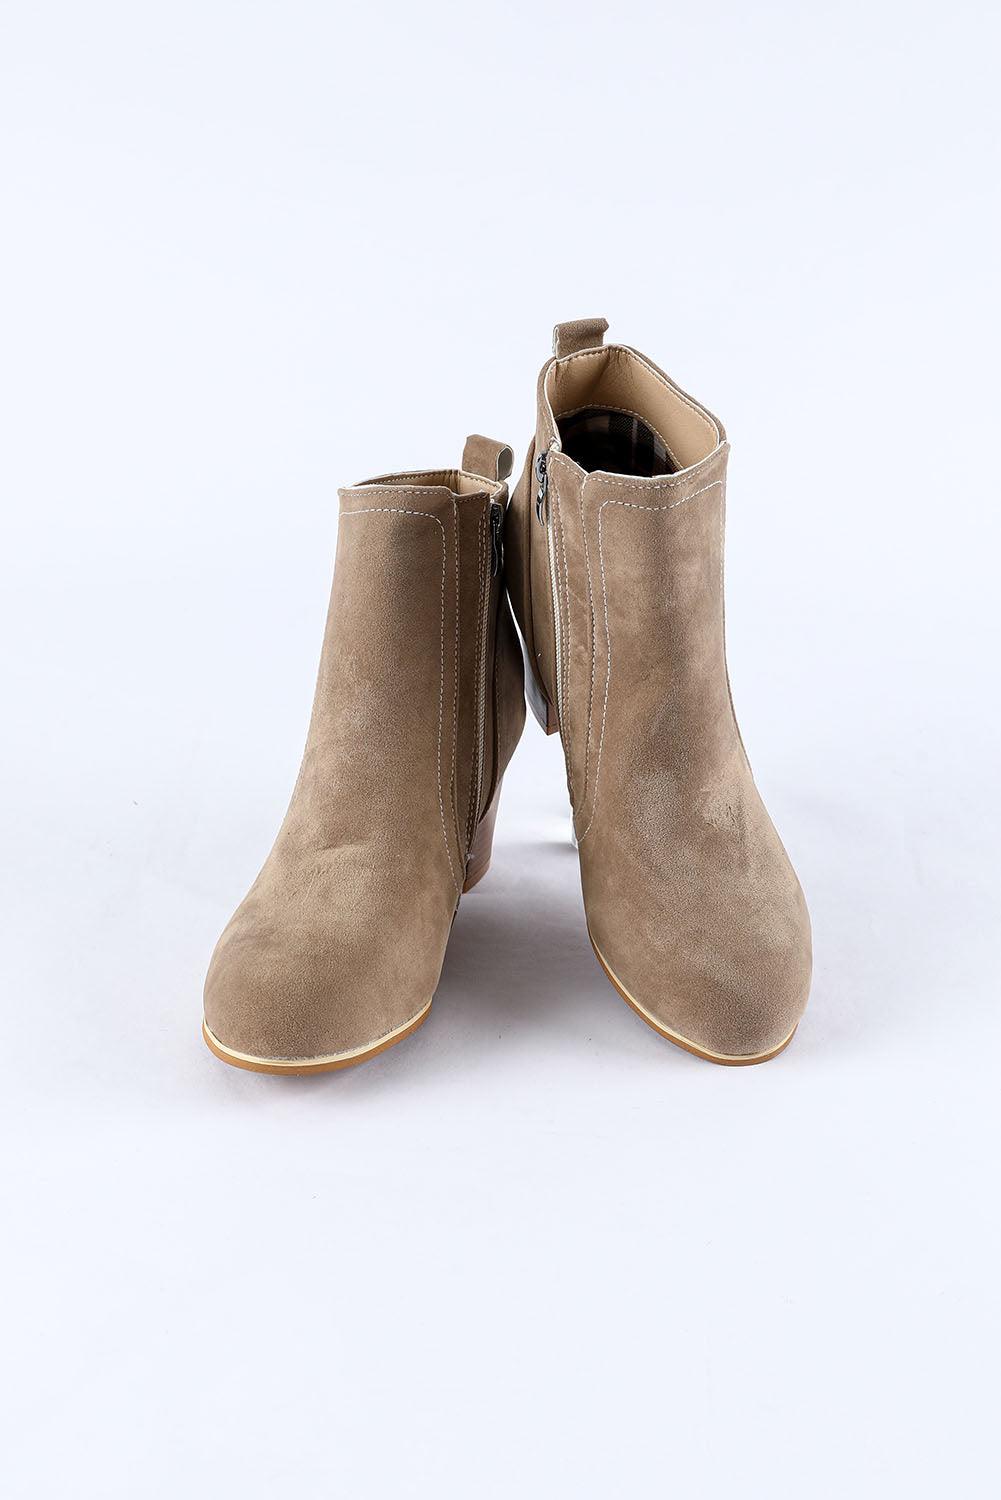 Faux Suede Size Zip Heeled Boots - God's Girl Gifts And Apparel